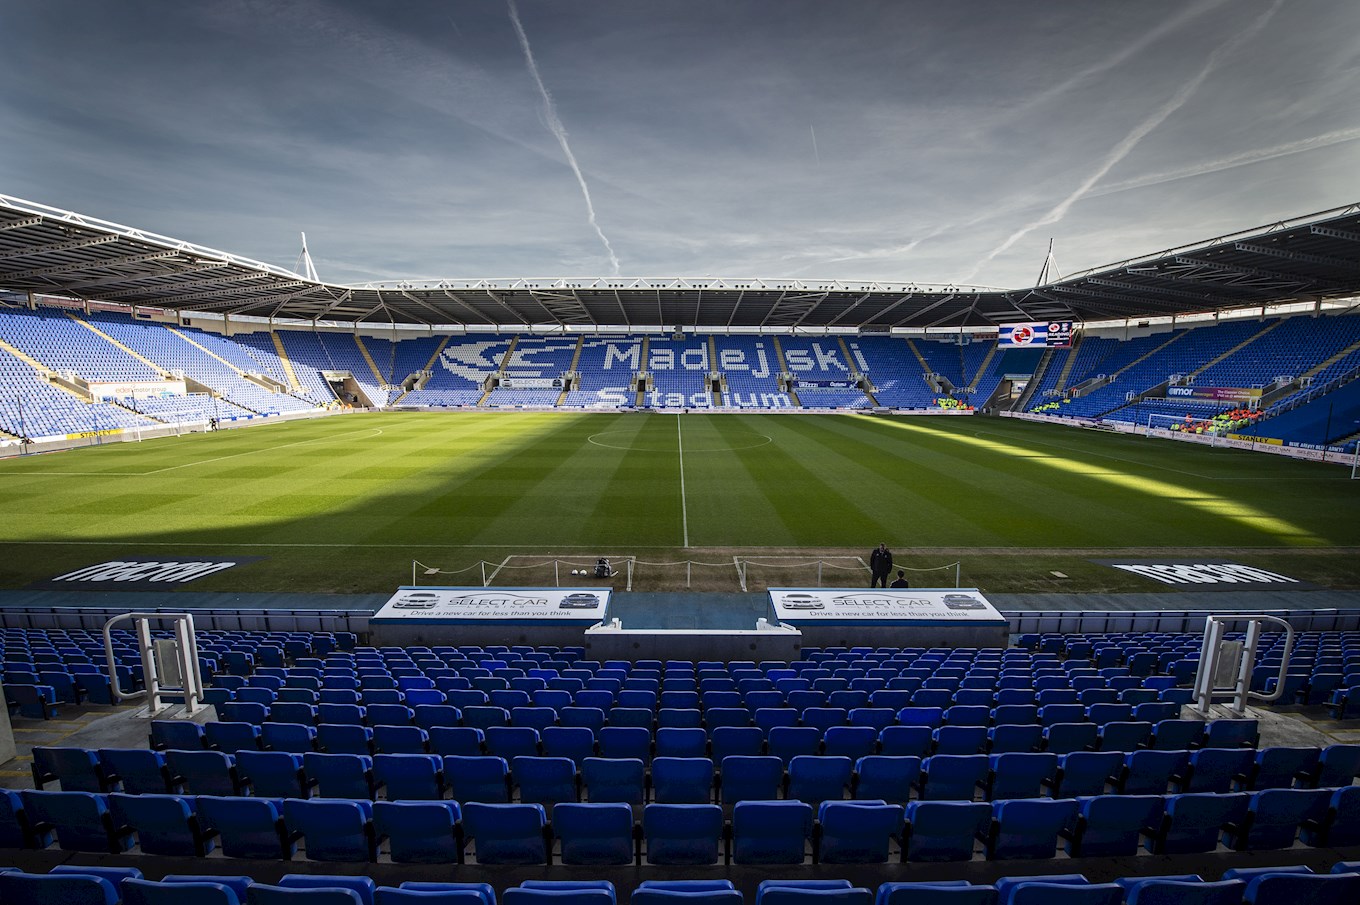 Reading FC partner with Redtorch to develop insight into their fanbase